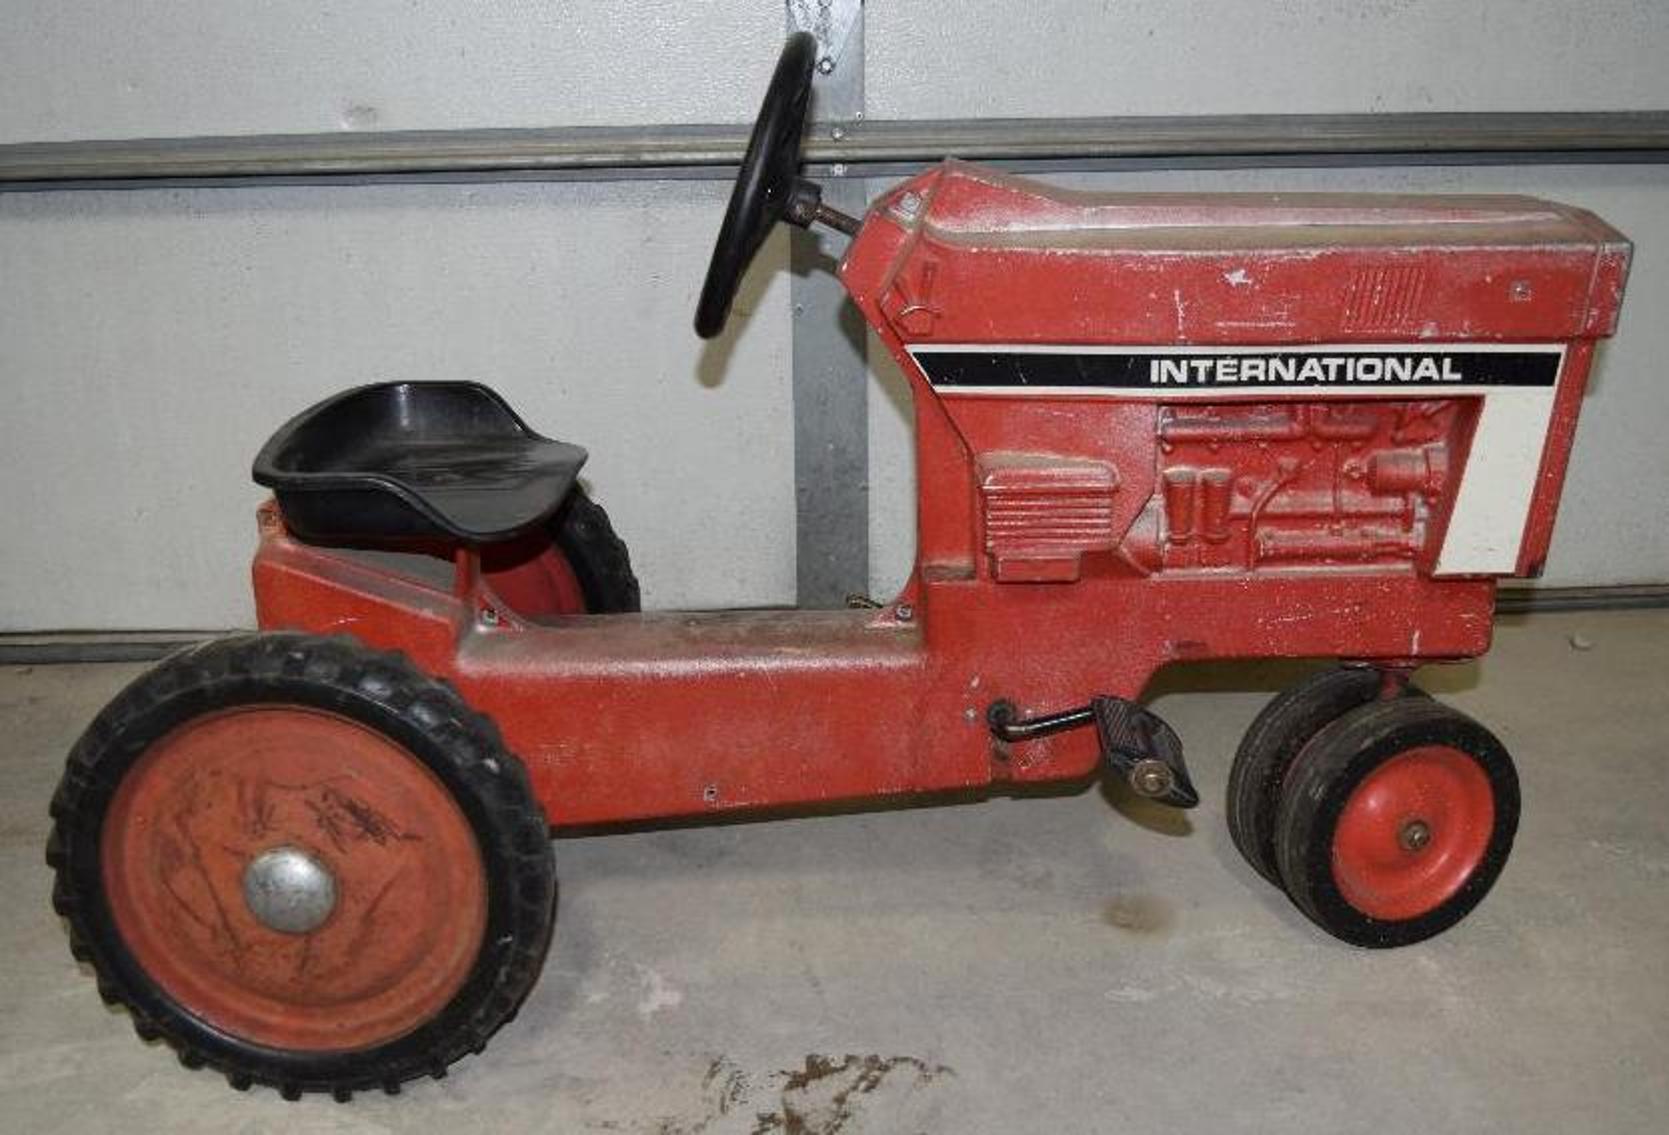 Pedal Tractors, Toy Tractors and Trucks